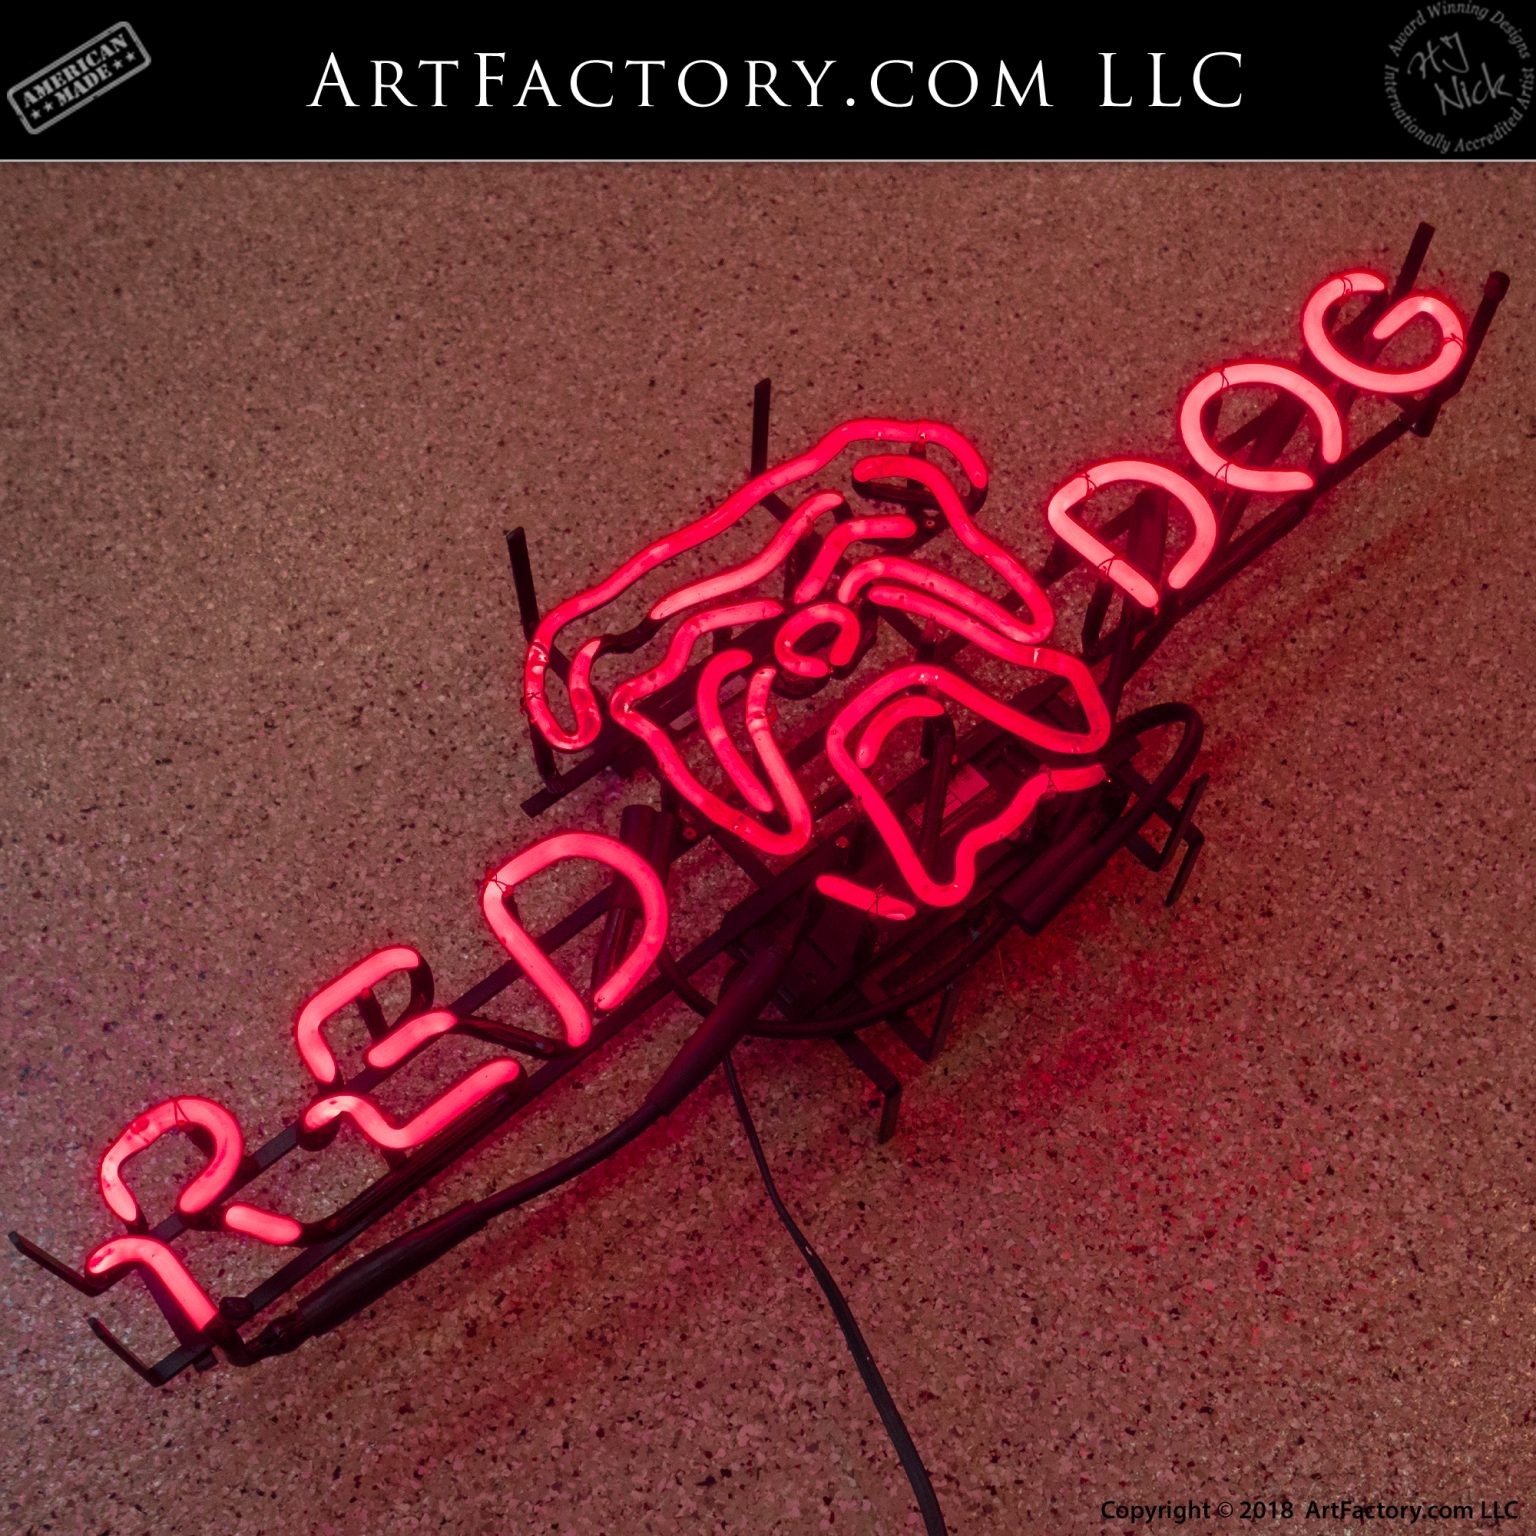 Small Red Dog Neon Beer Sign 3 1536x1536 